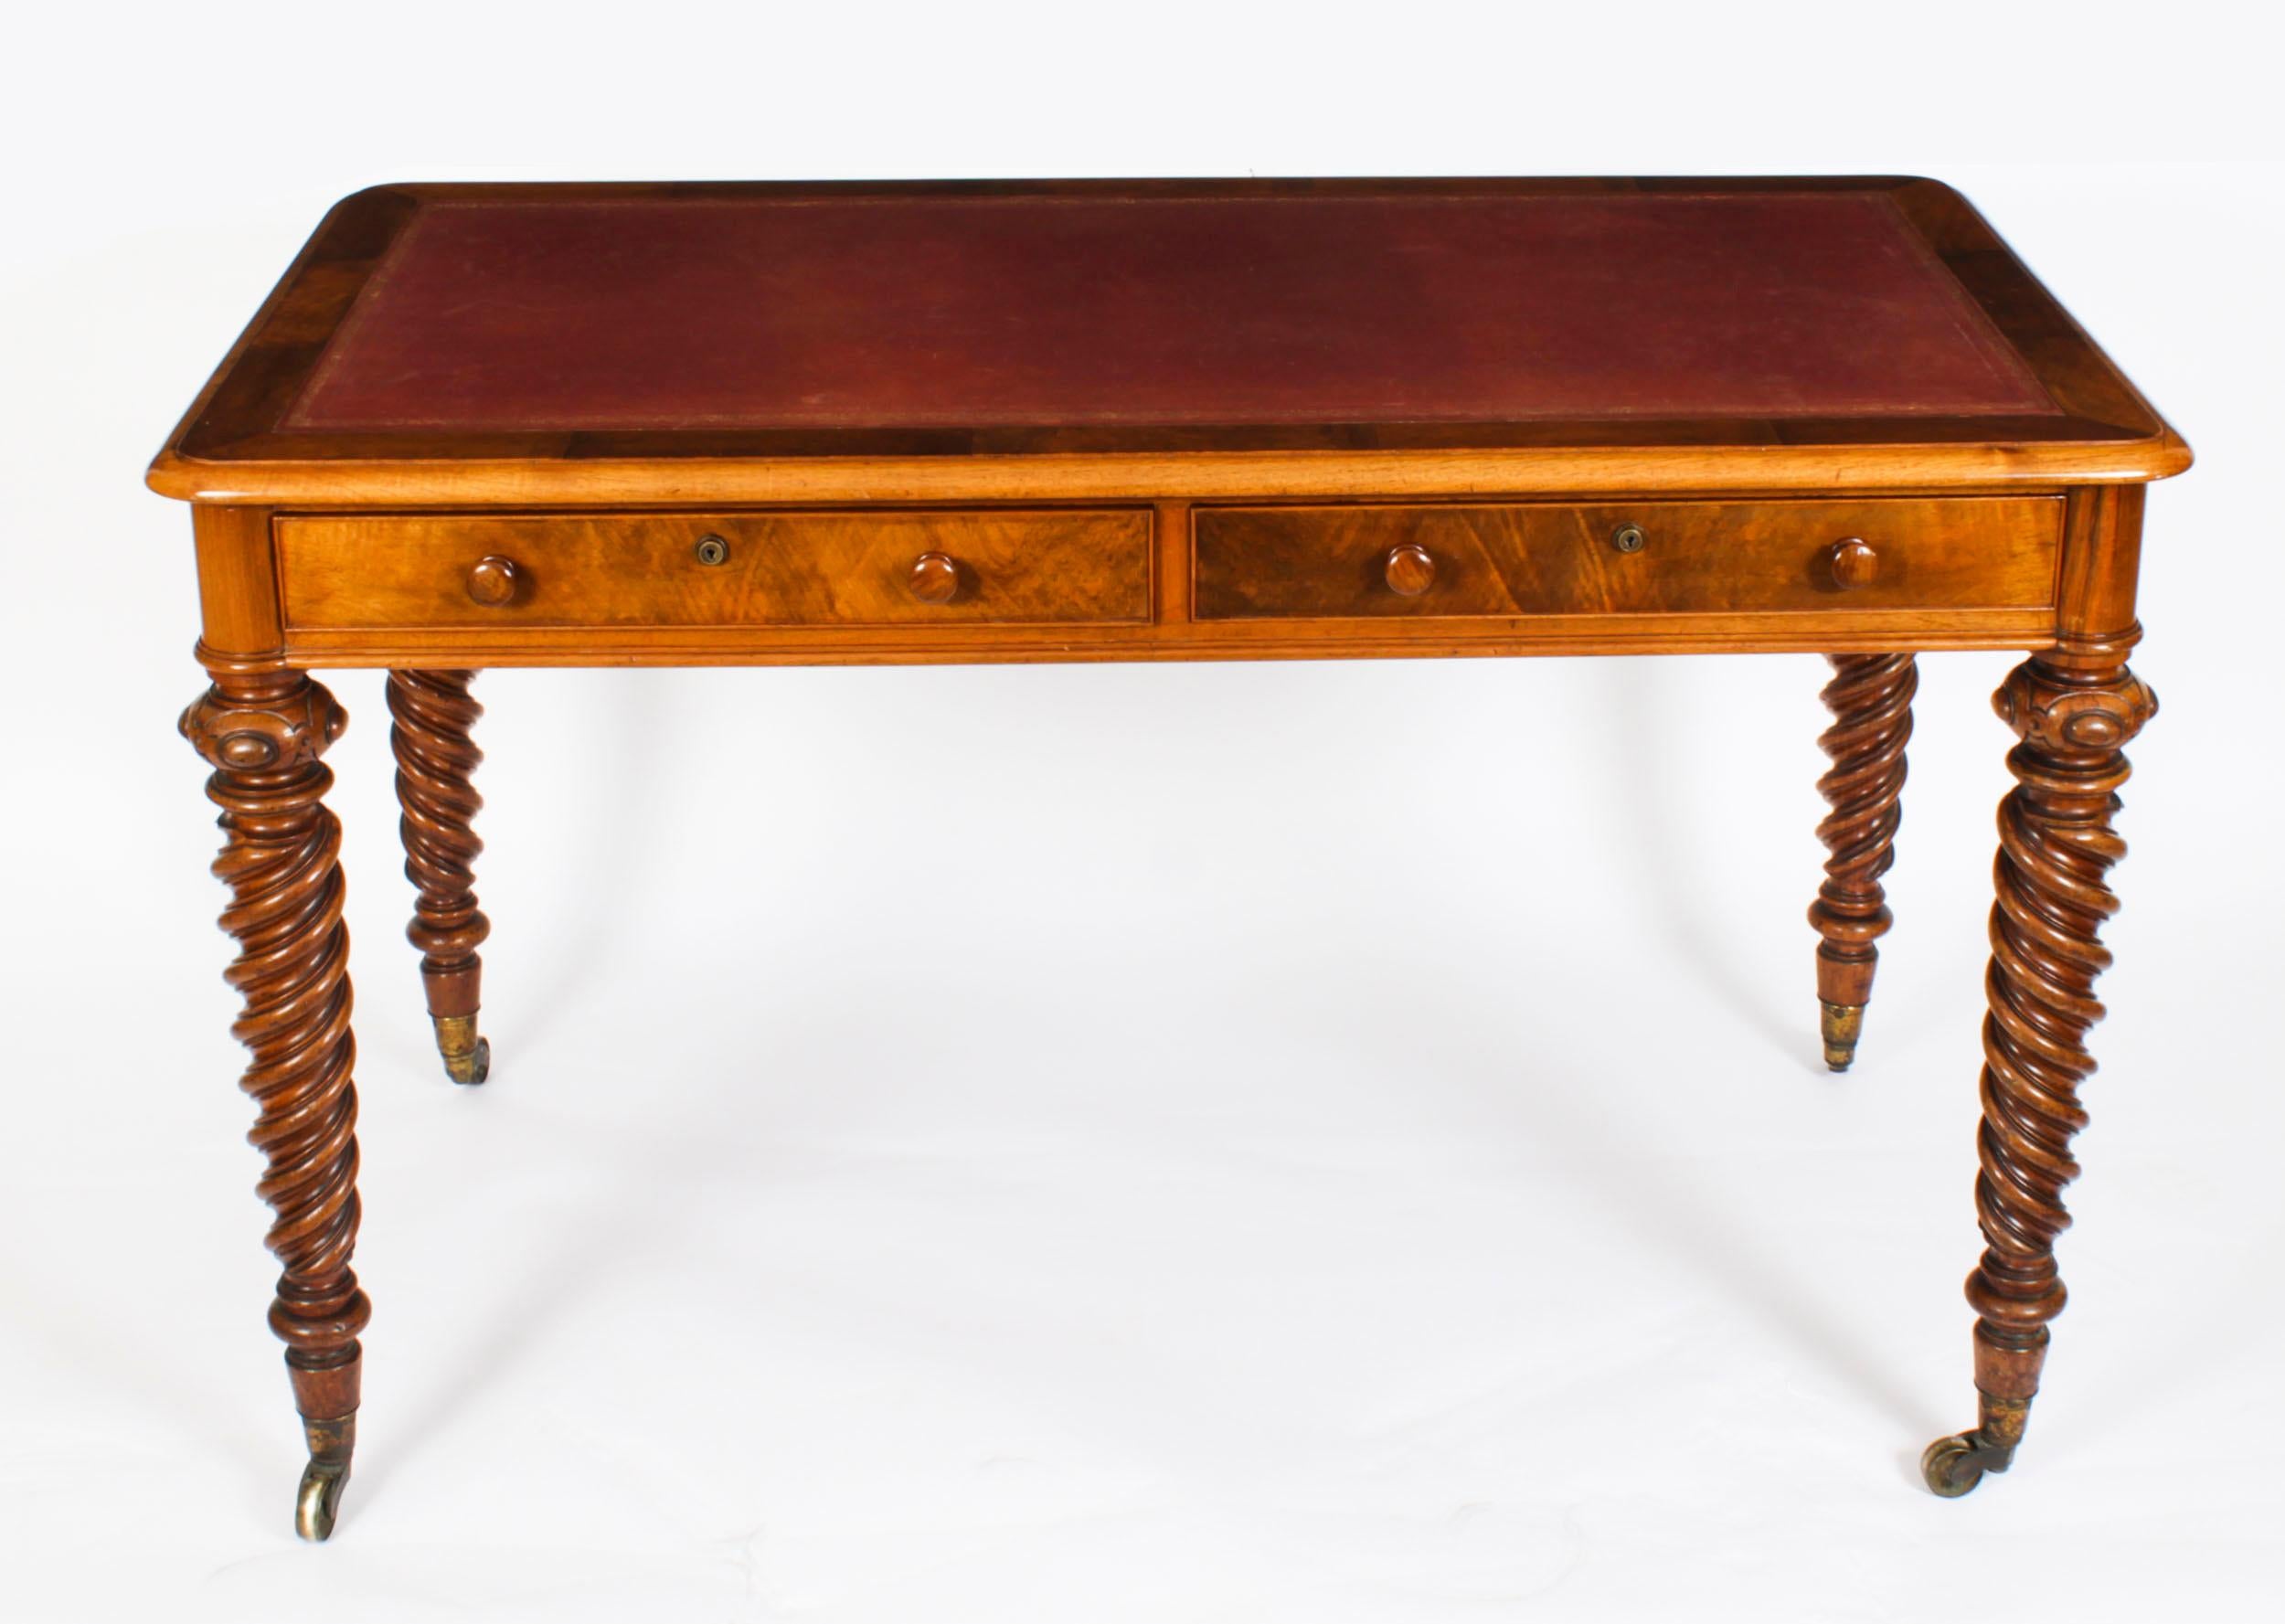 Antique Victorian walnut writing table, circa 1850 in date.

One of the drawers is stamped by the maker:

C.Hindley & Sons, late Miles & Edwards, 134 Oxford Street, London.
It bears the inventory number 12451

The rectangular top features a moulded